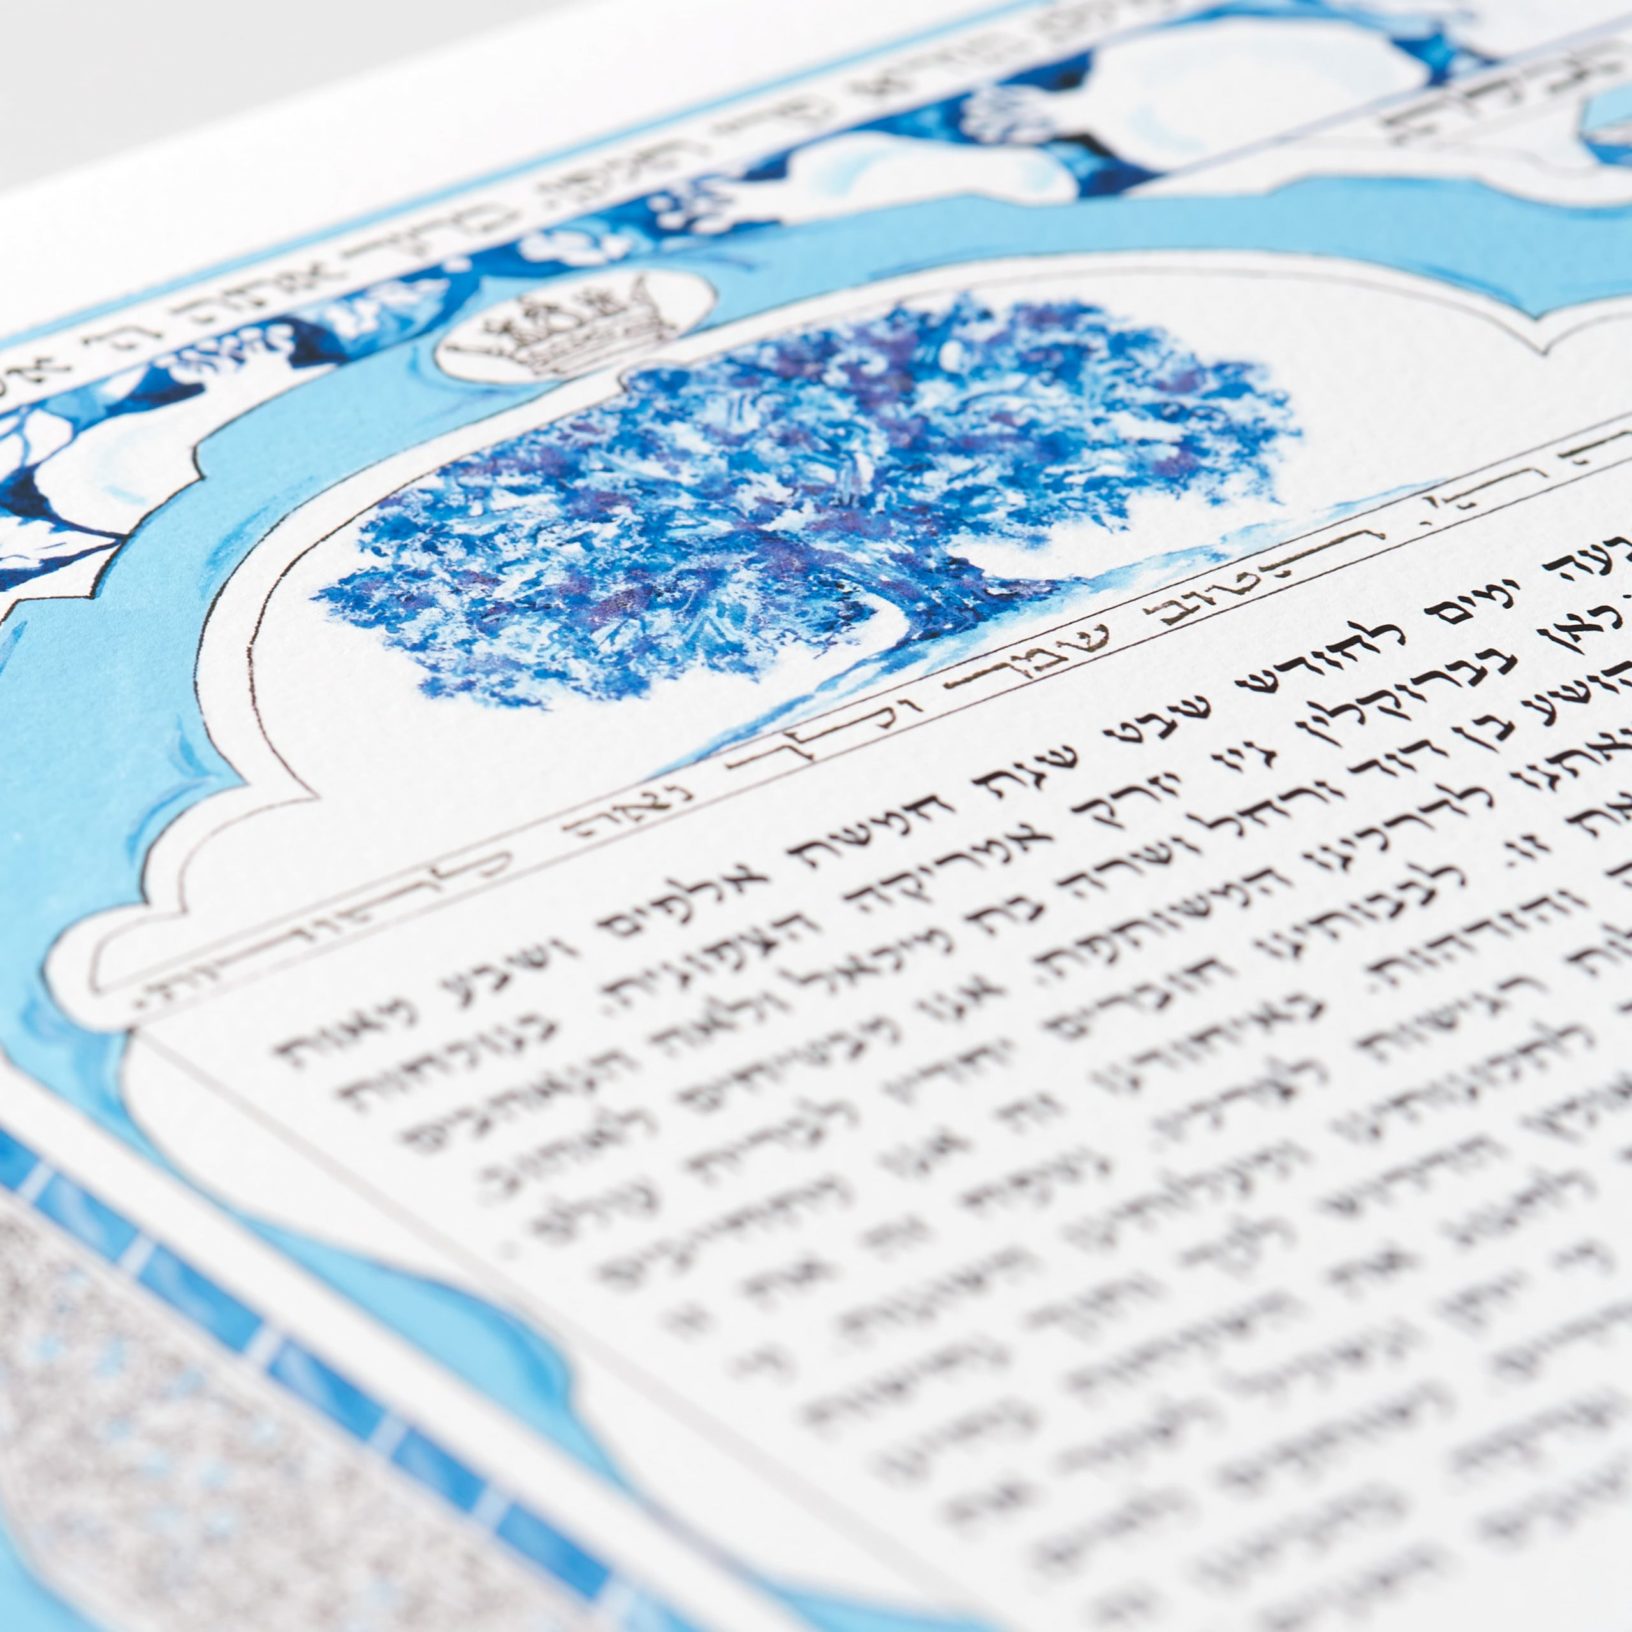 36 Pomegranates And 7 Blessings Ketubah Marriage Contracts by Angela Munitz